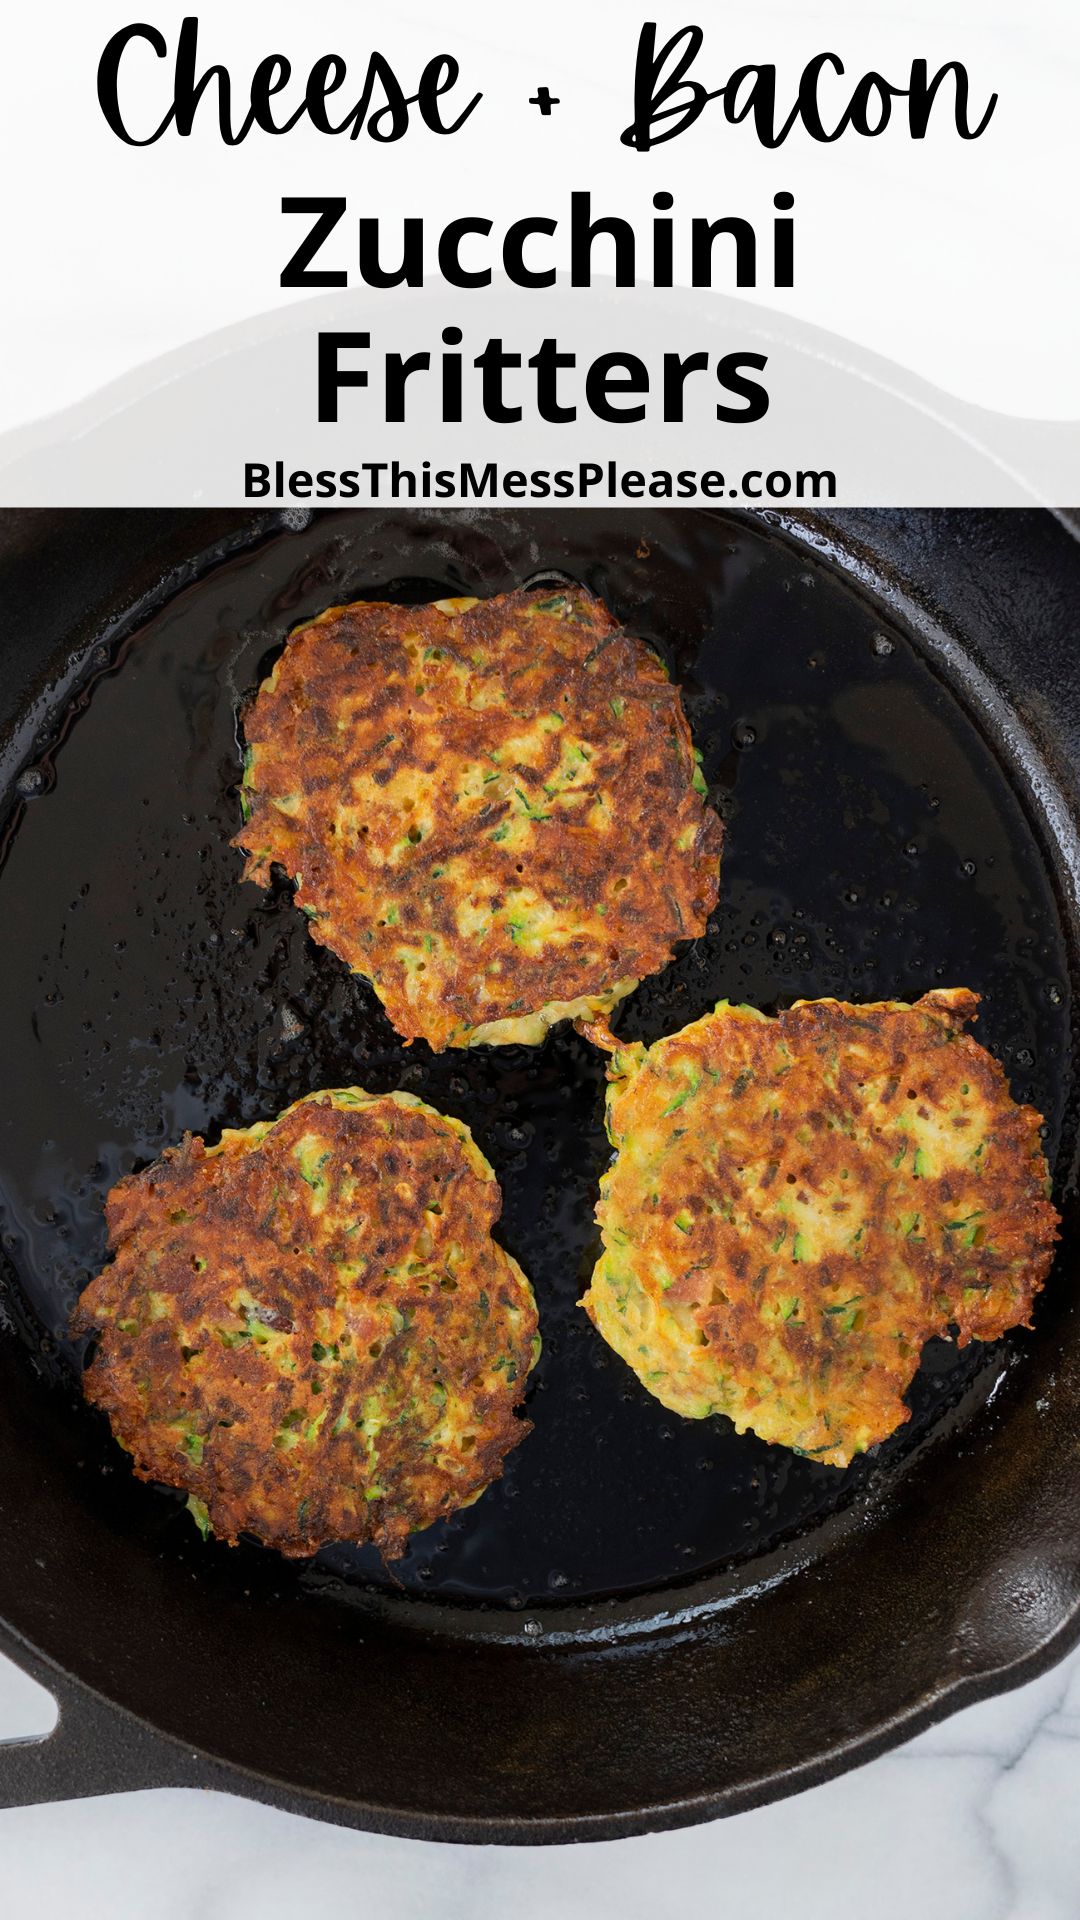 Simple pan fried zucchini fritters that are bursting with flavor thanks to the addition of cheese and bacon. These will be a hit all summer long. via @barbarabakes